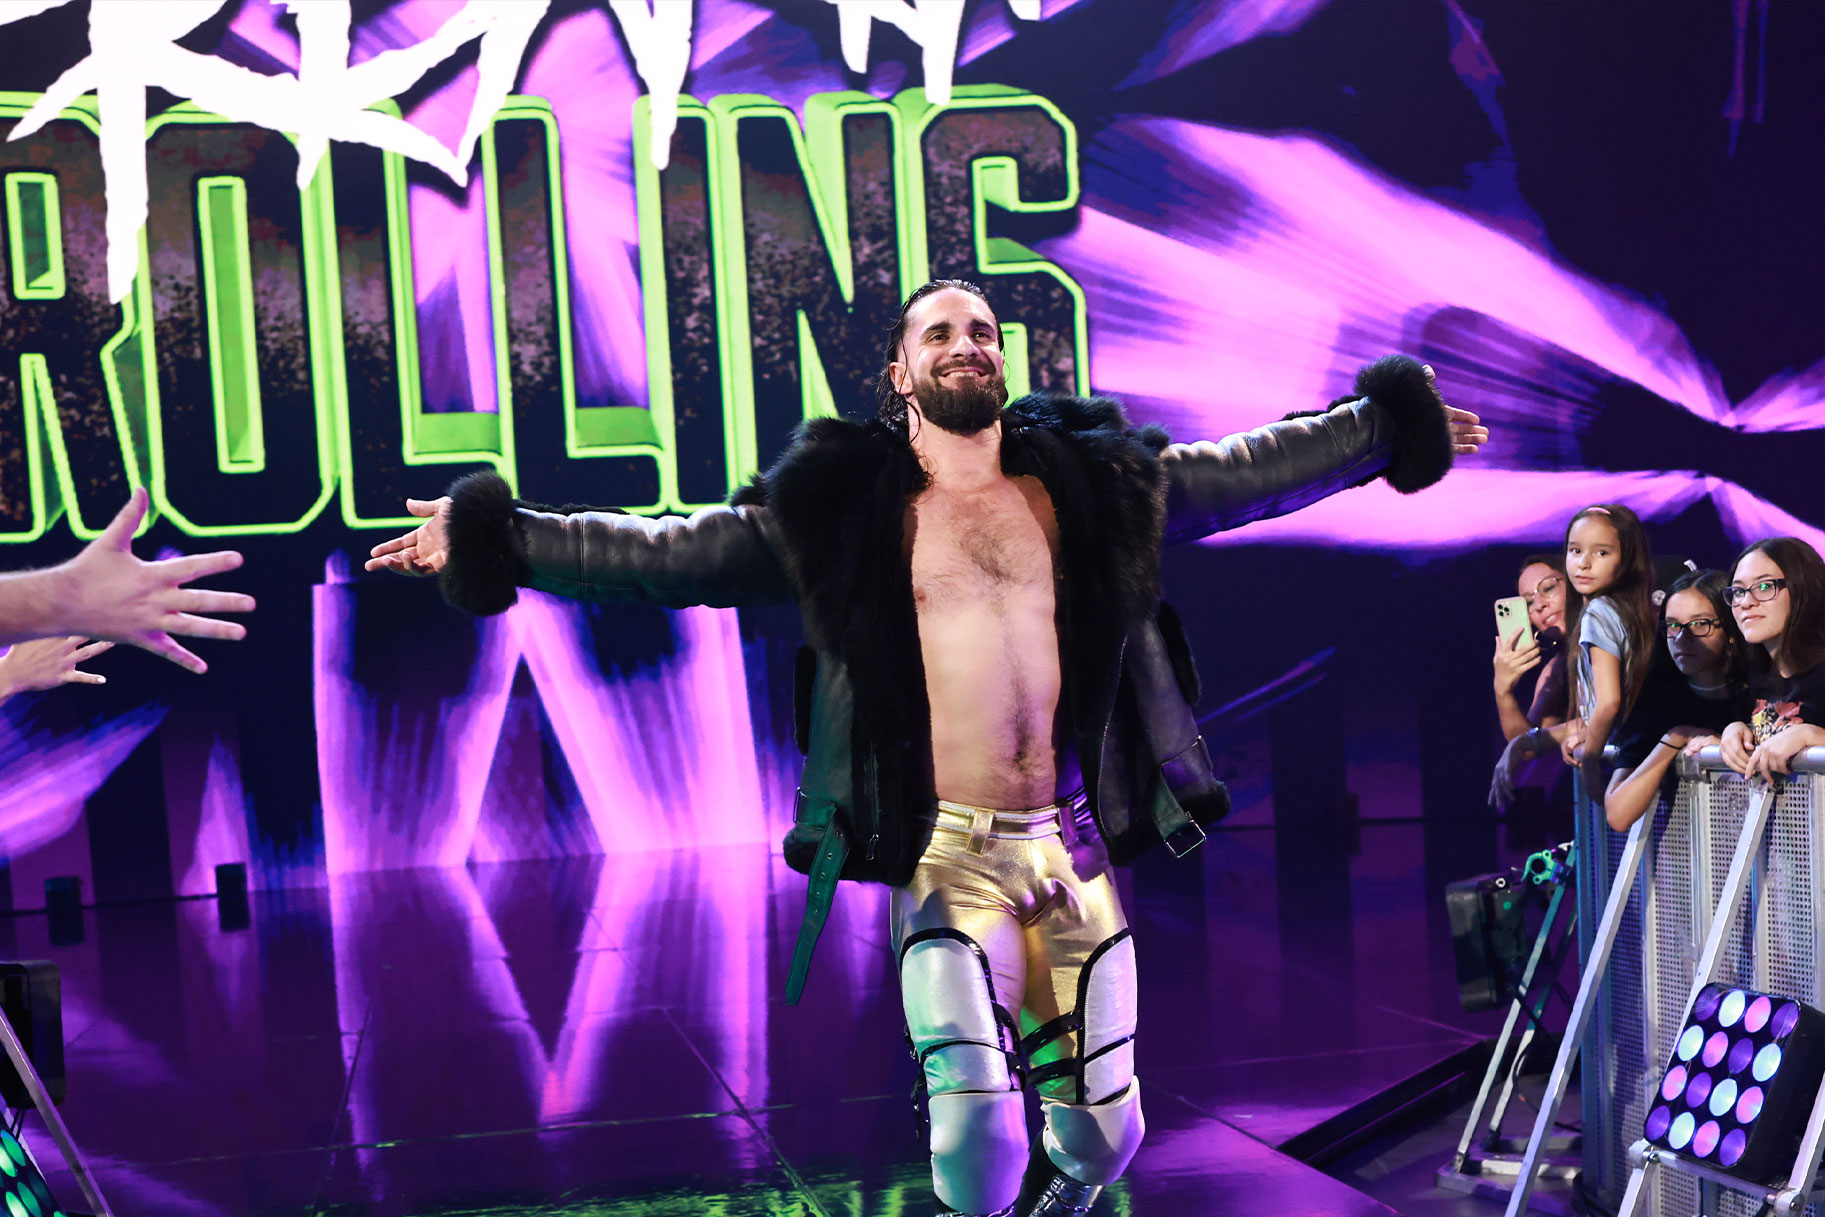 Seth Rollins walking to the ring with his arms extended and a smile on his face